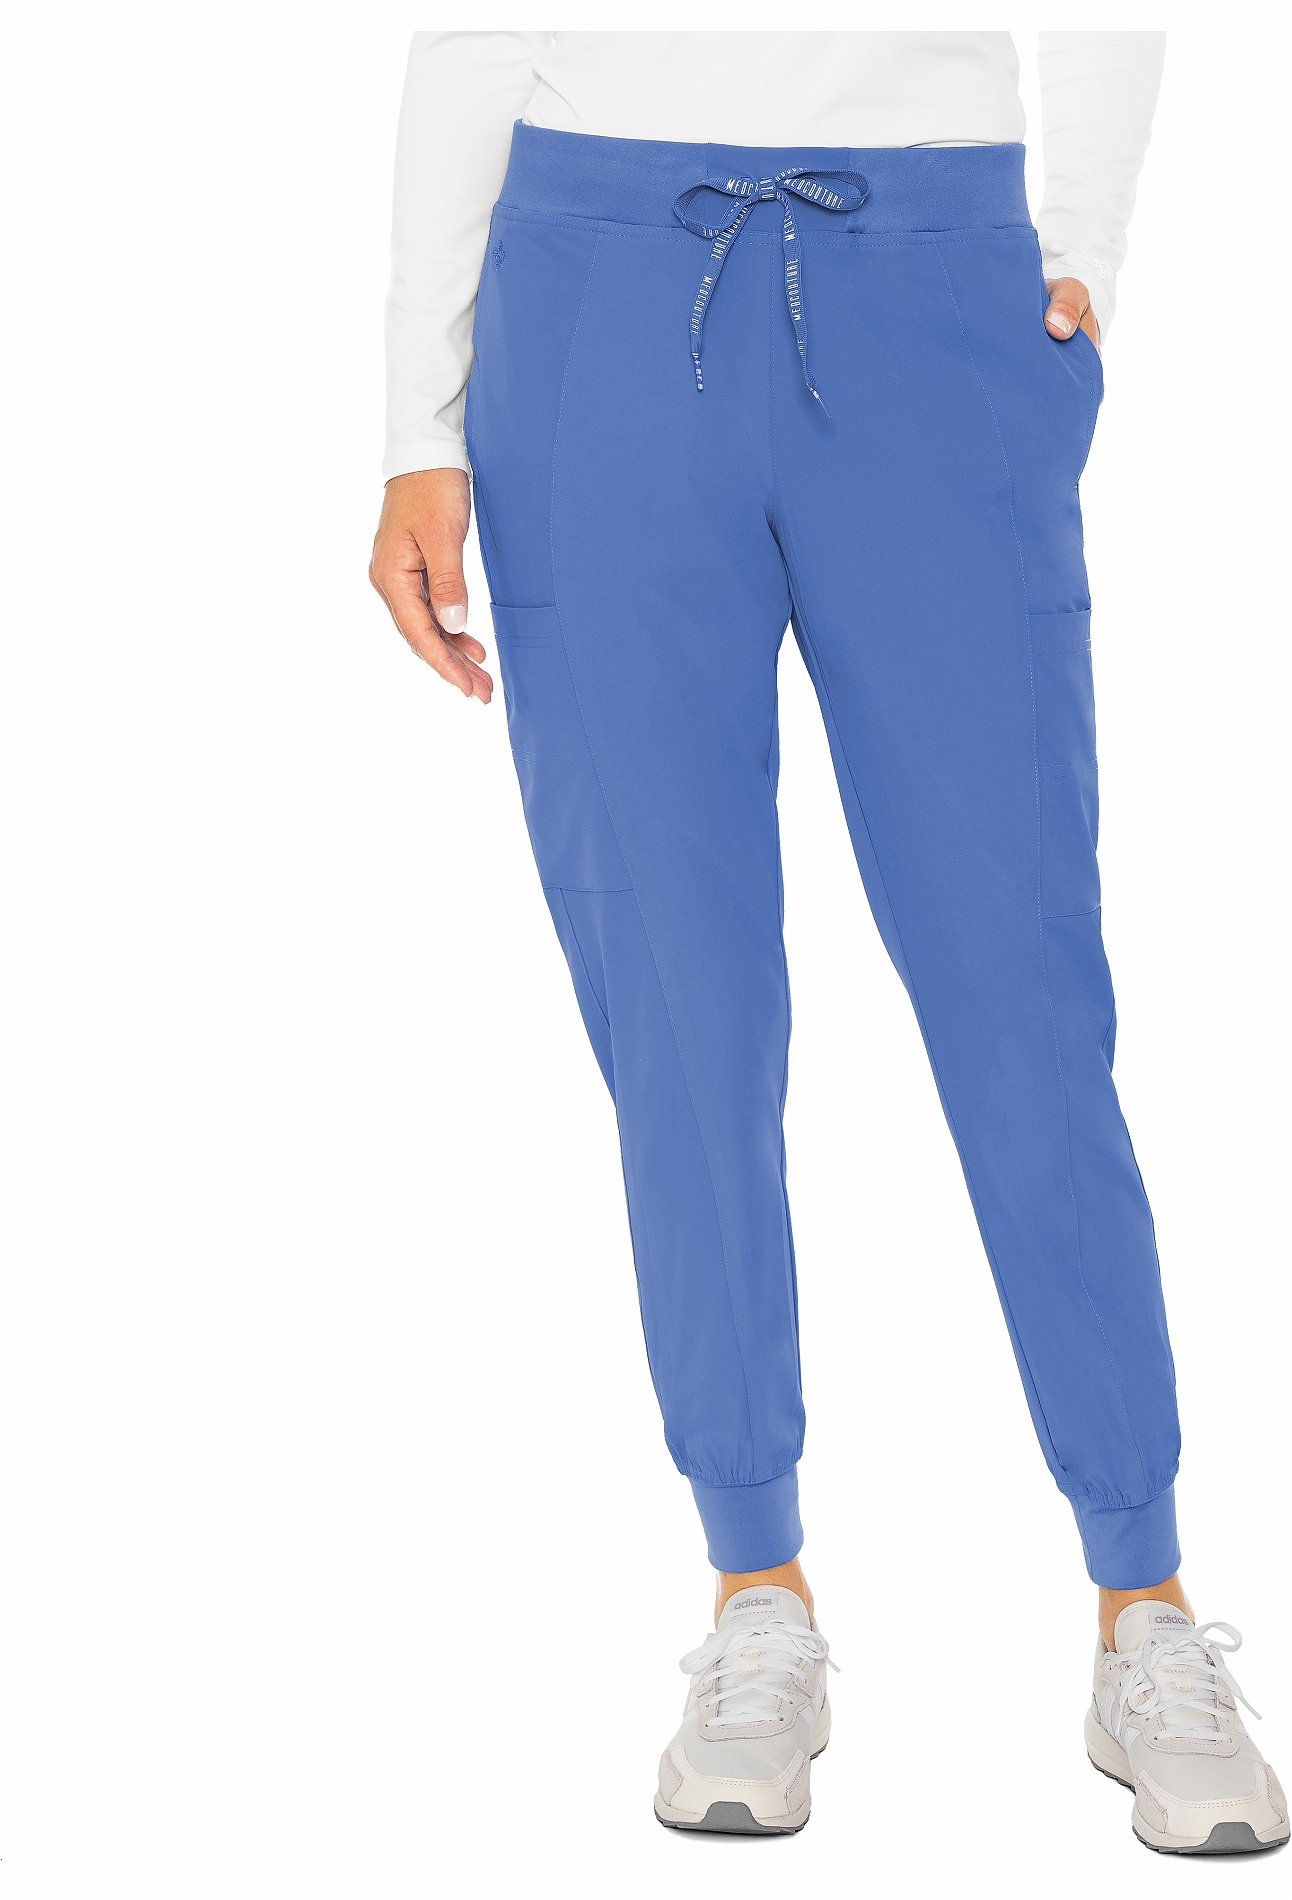 Med Couture Peaches Women's Seamed Jogger Scrub Pants-MC8721 | Medical ...